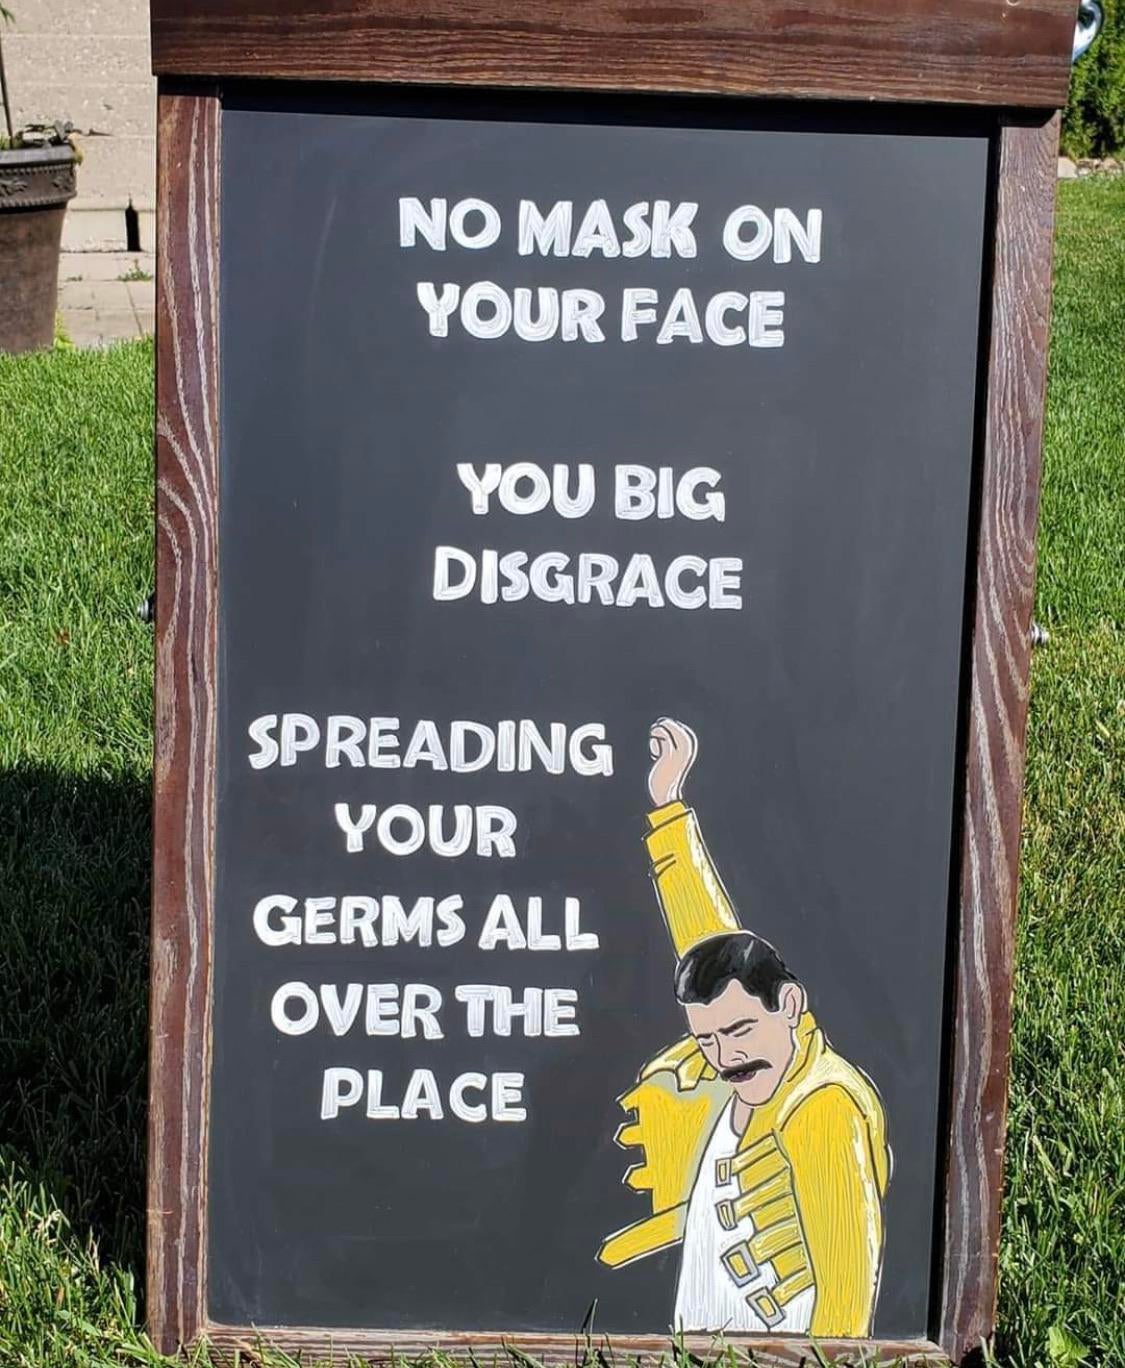 grass - No Mask On Your Face You Big Disgrace Spreading Your Germs All Over The Place